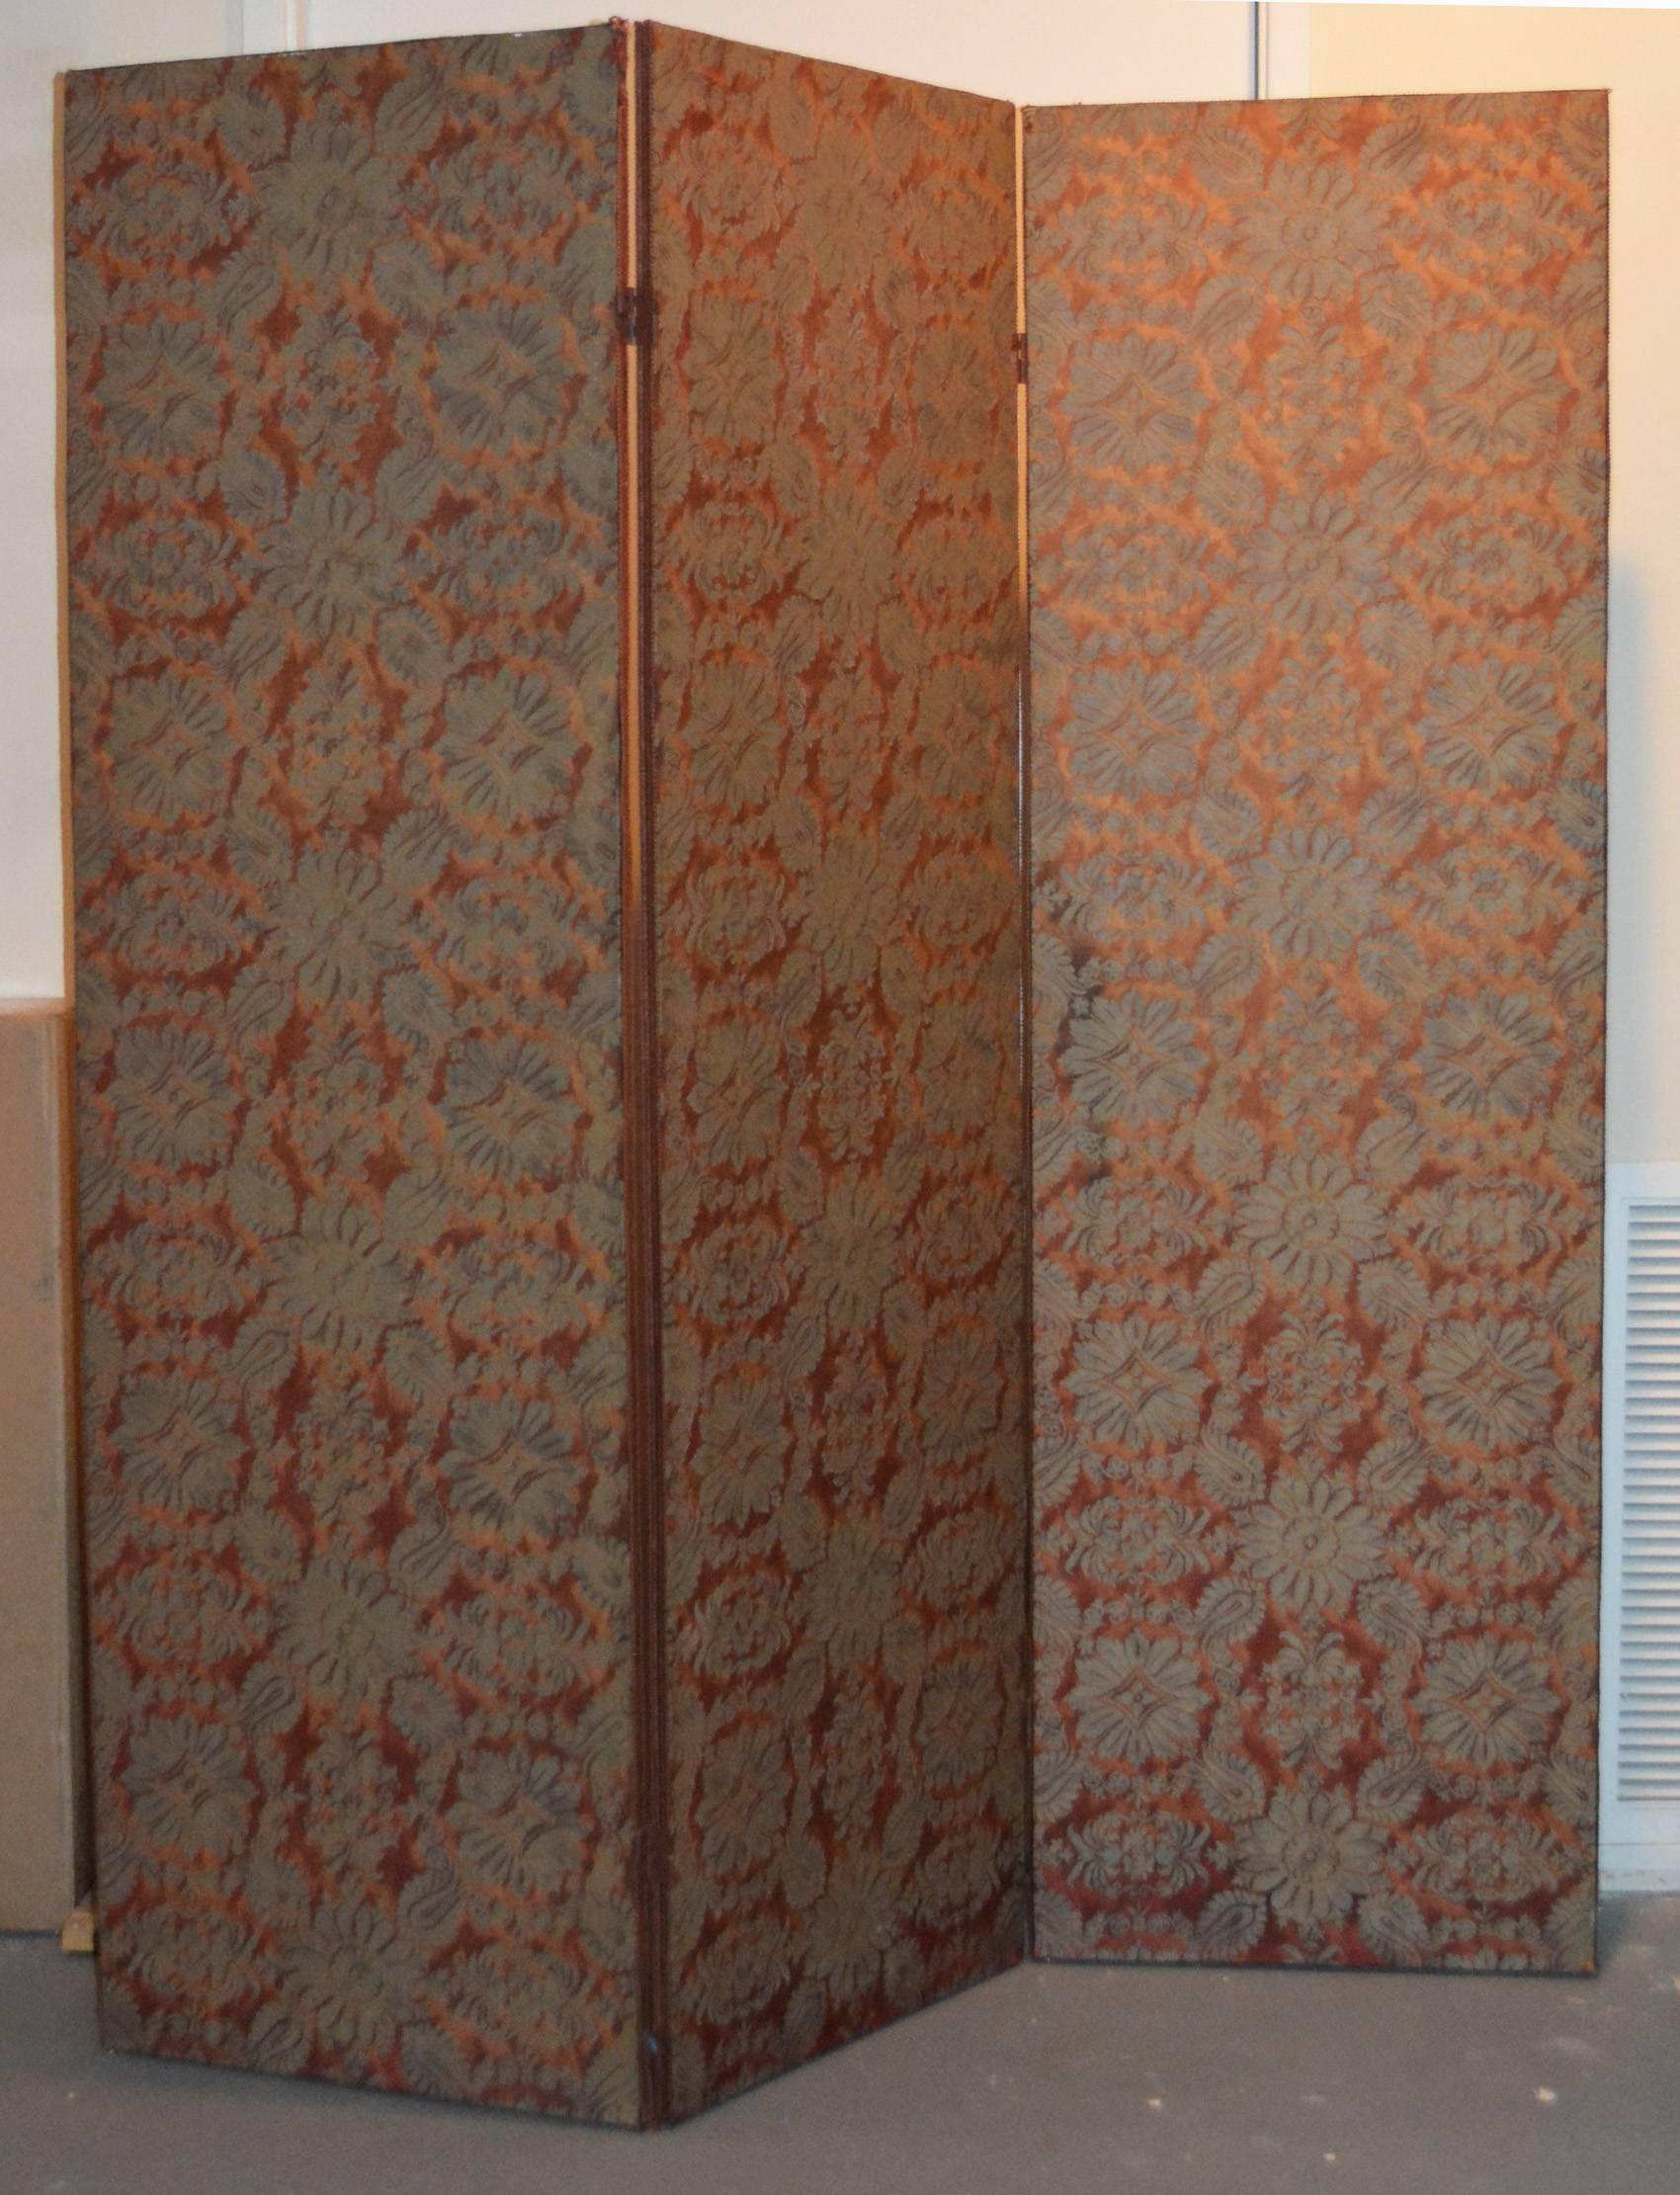 A lovely 1960s three panel screen covered on both sides with Fortuny "Impero" in copper and silvery gold. Excellent condition with matching gimp trim on edges.